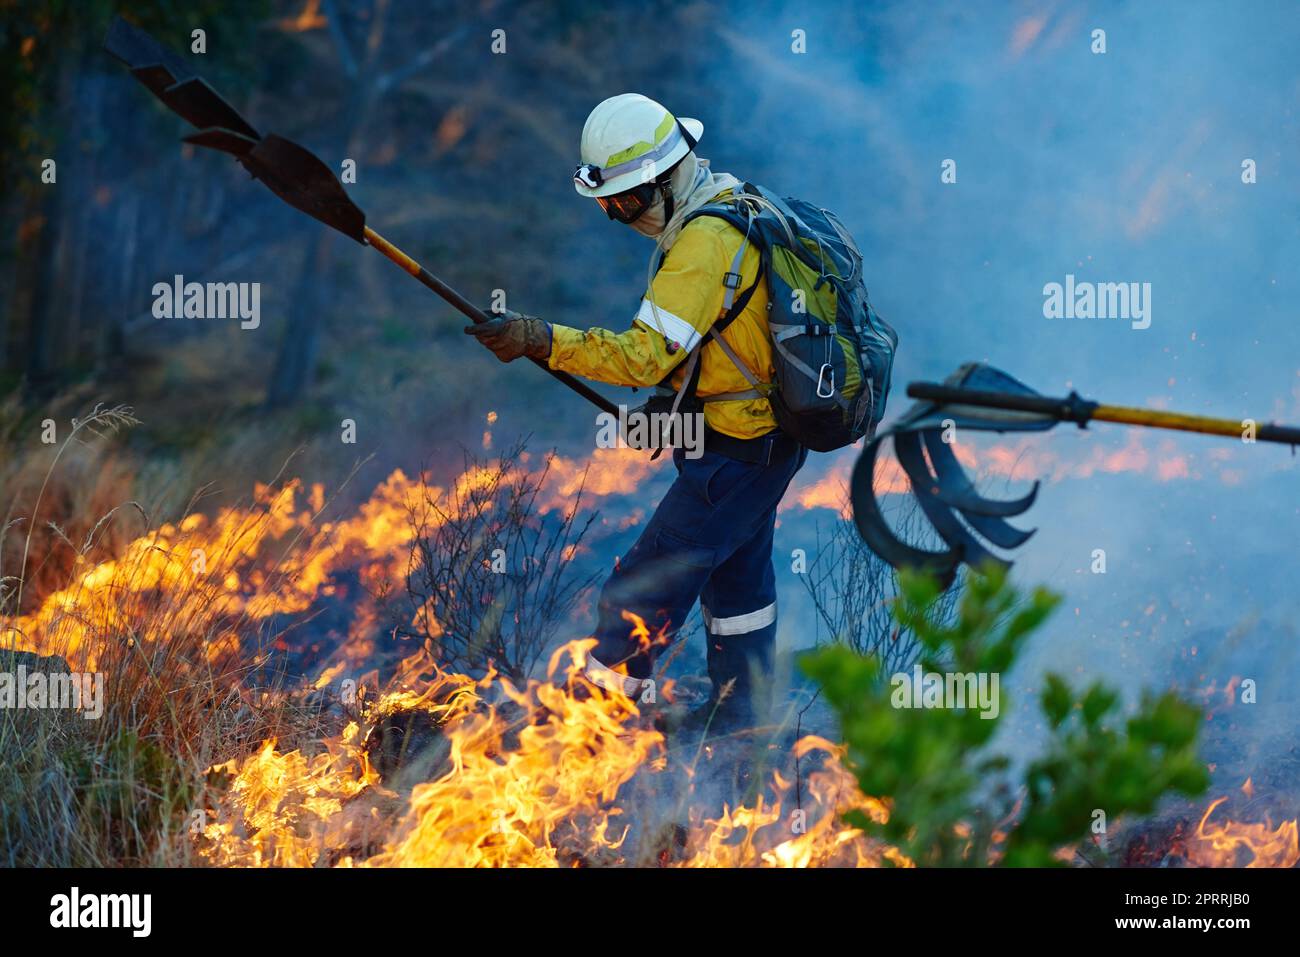 Beating back the fire. fire fighters combating a wild fire. Stock Photo